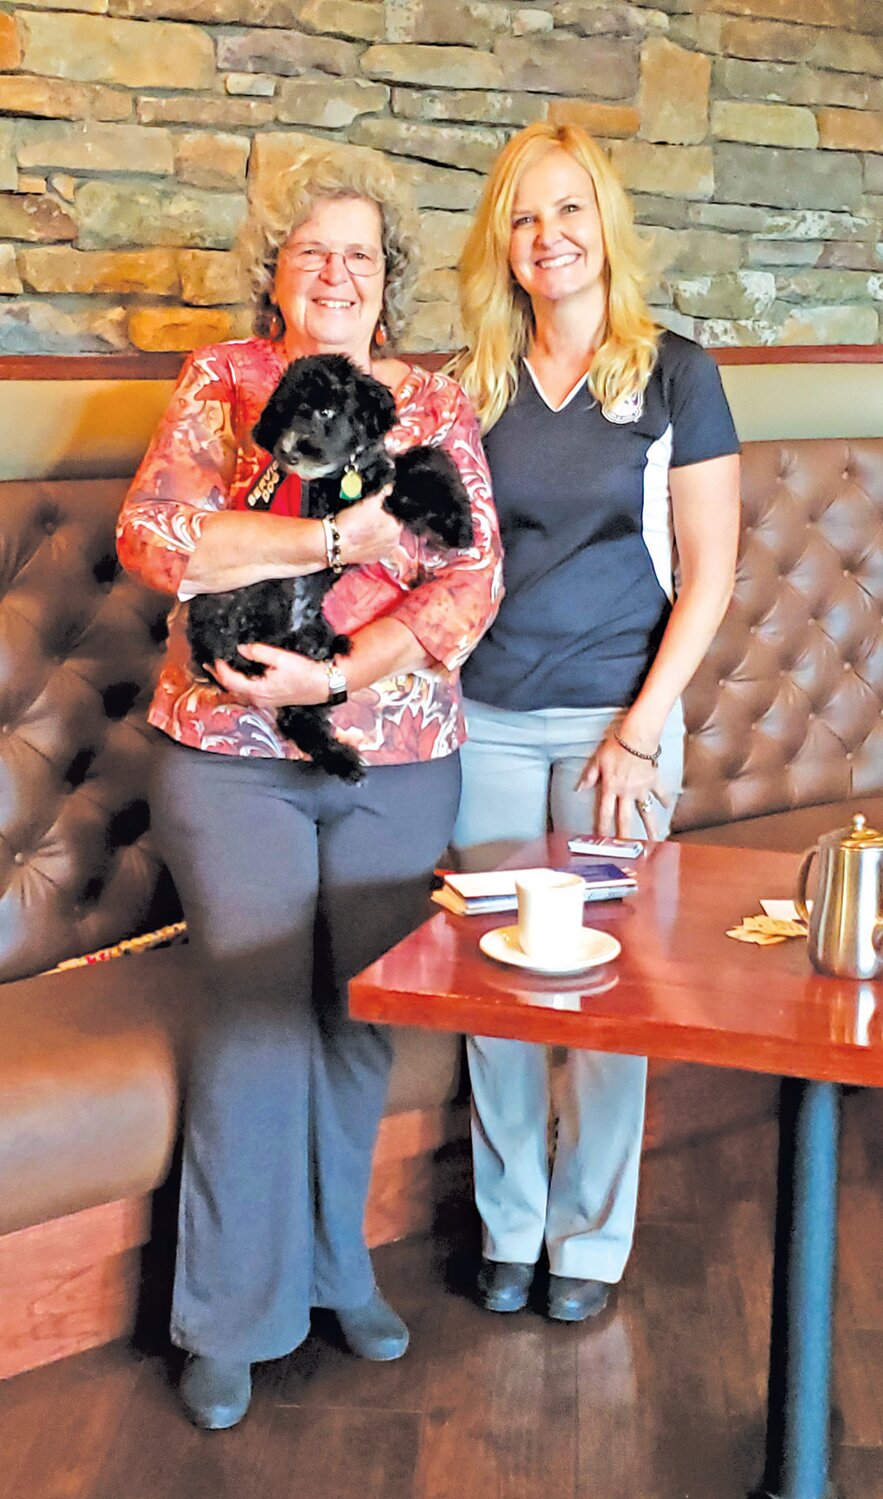 Woman’s Club of Quakertown Program Committee member Stephanie Simak, holding Fitz, and Heather Lloyd of Tails of Valor.